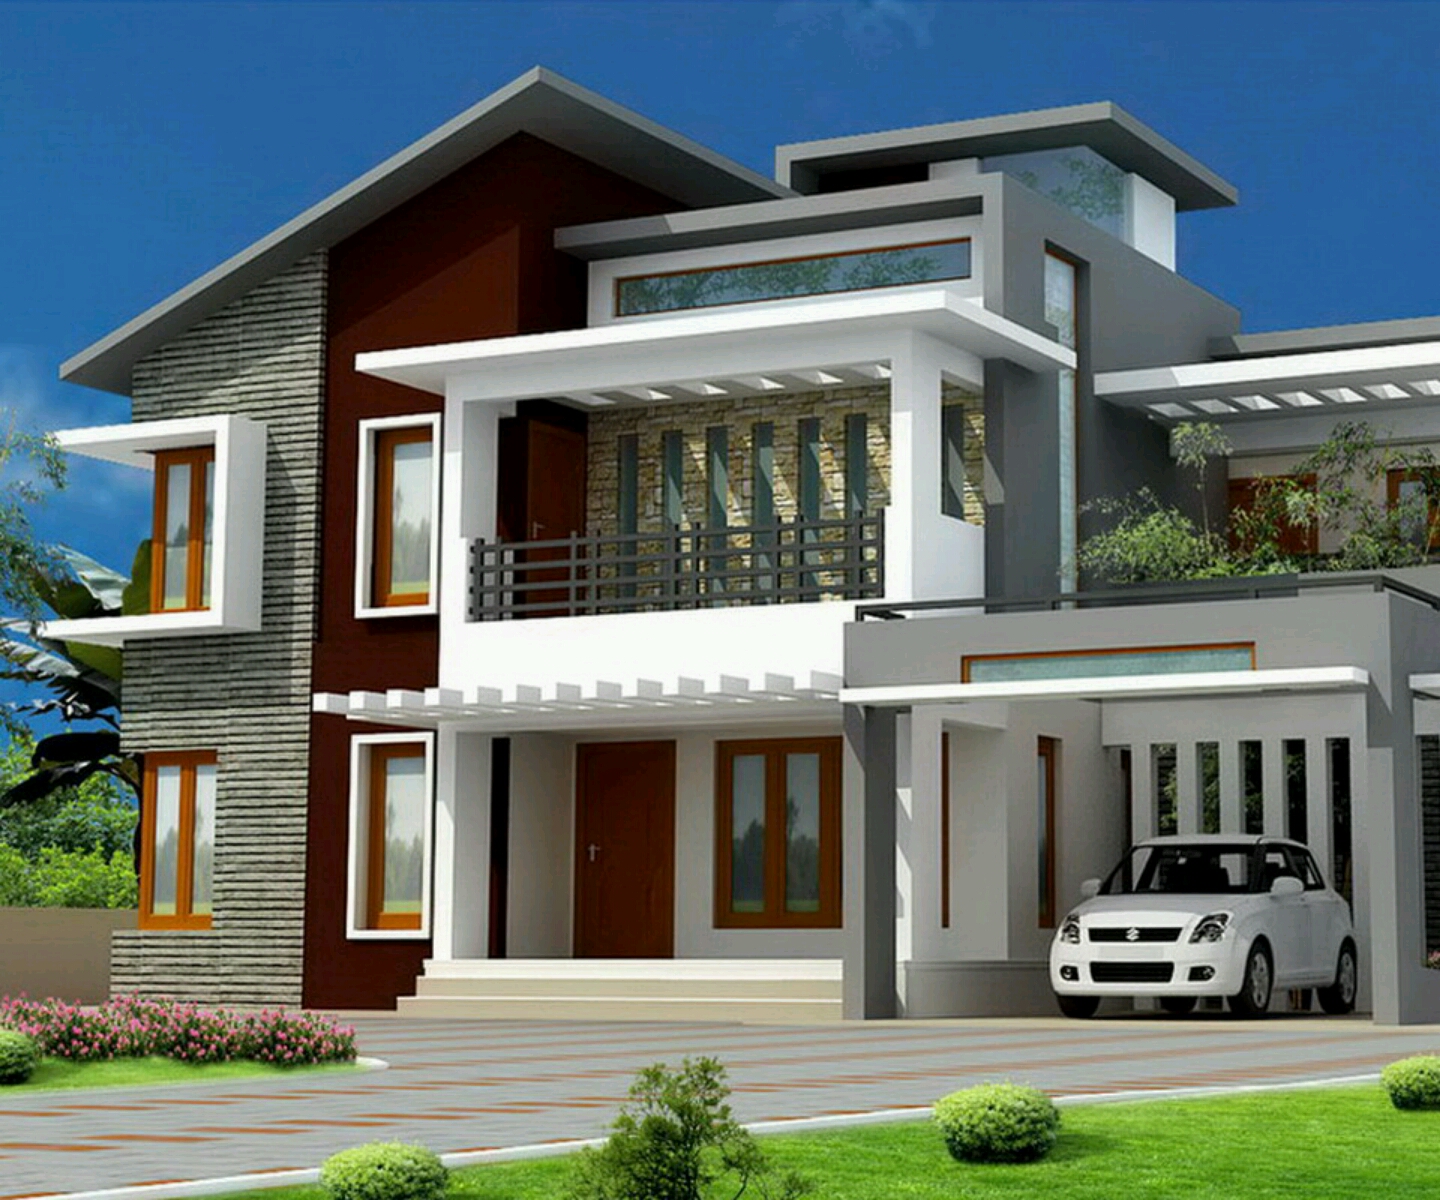 New home designs latest Modern bungalows exterior 